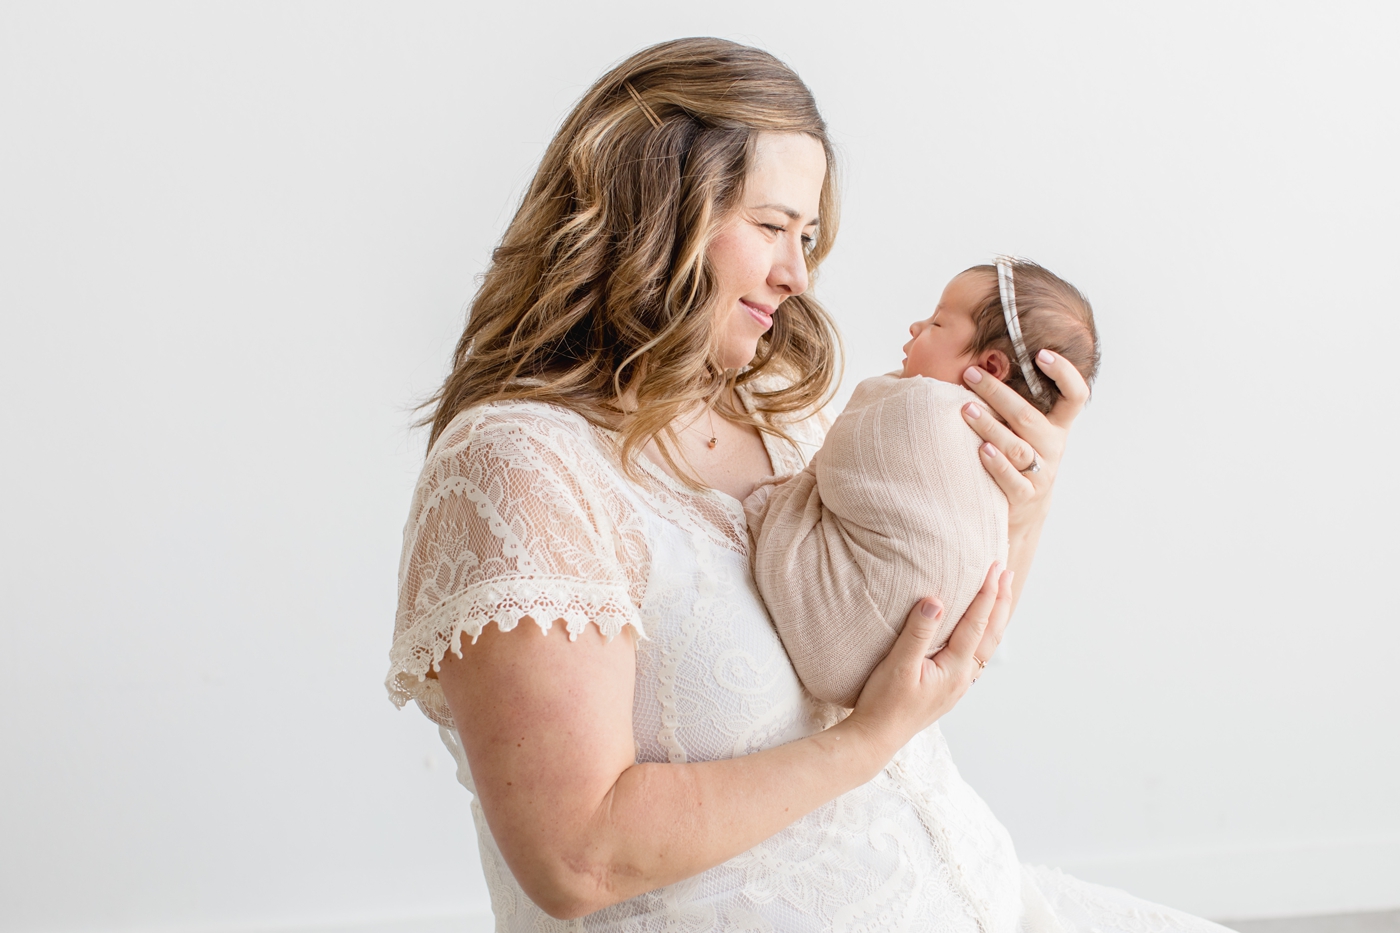 Mom holding baby girl up close and smiling at her. during studio newborn session. Photo by Sana Ahmed Photography.